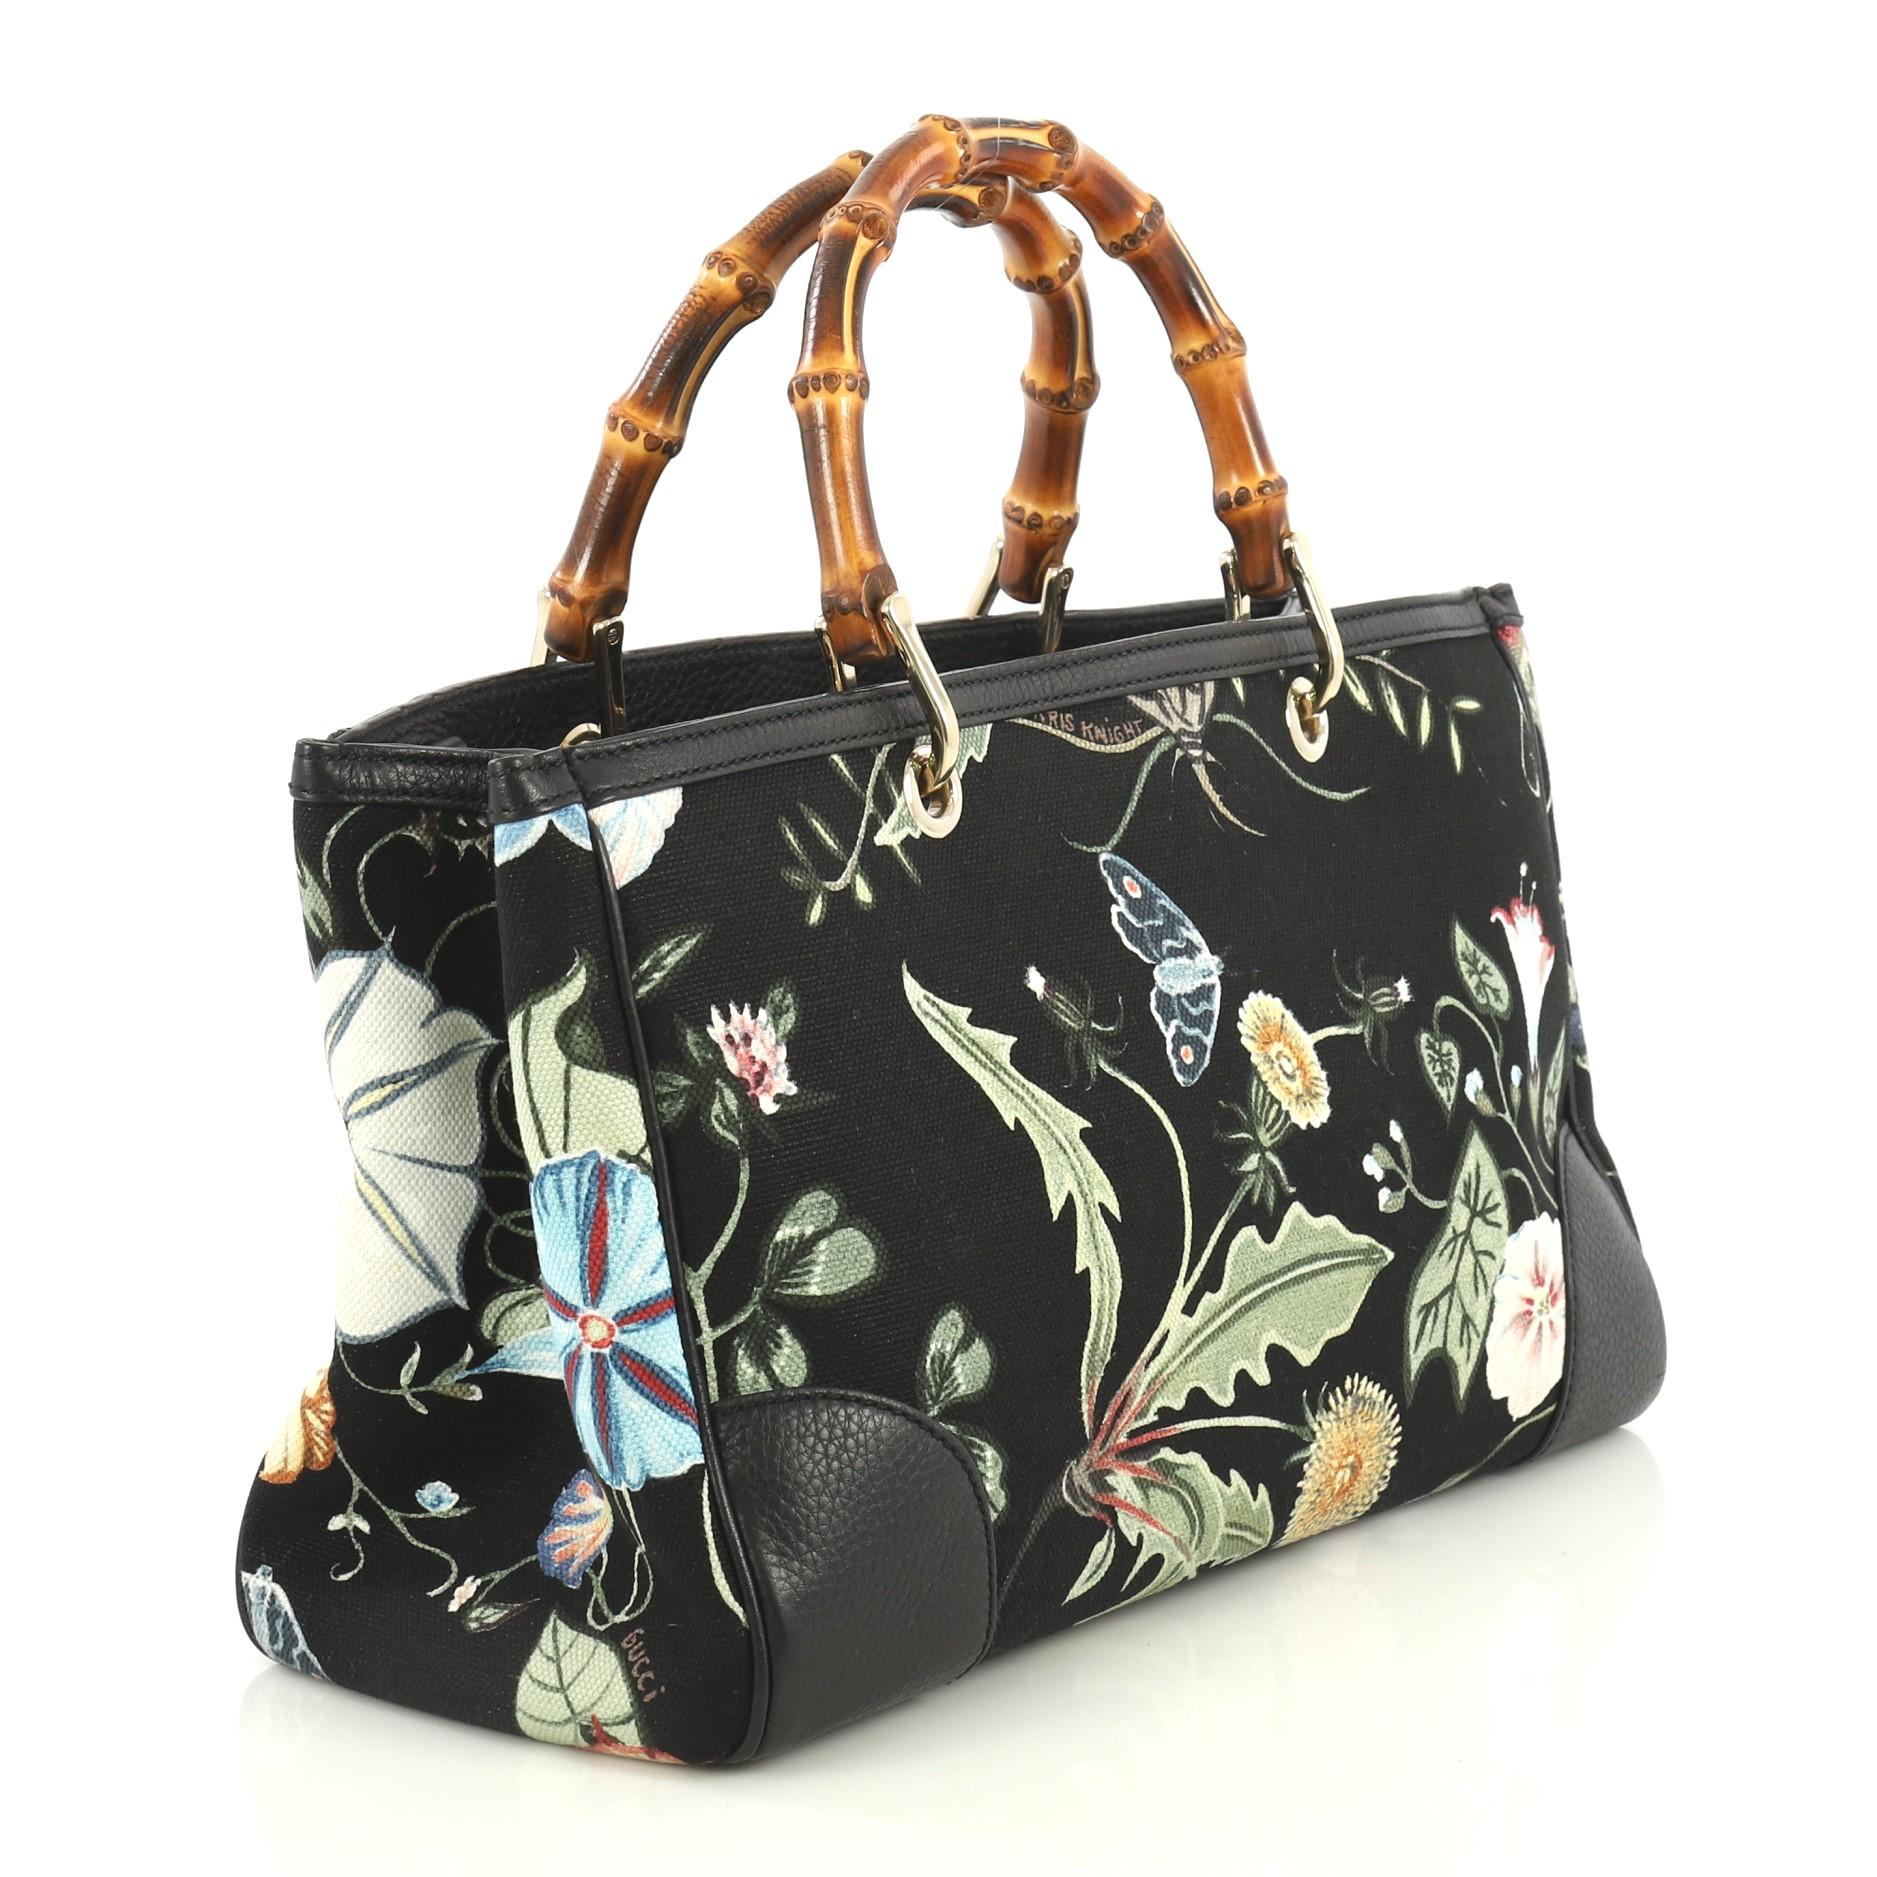 This Gucci Bamboo Shopper Tote Flora Canvas Medium, crafted from black printed canvas, features dual bamboo handles, floral motif, leather trim, and gold-tone hardware. Its magnetic tab closure opens to a neutral fabric interior with middle zip